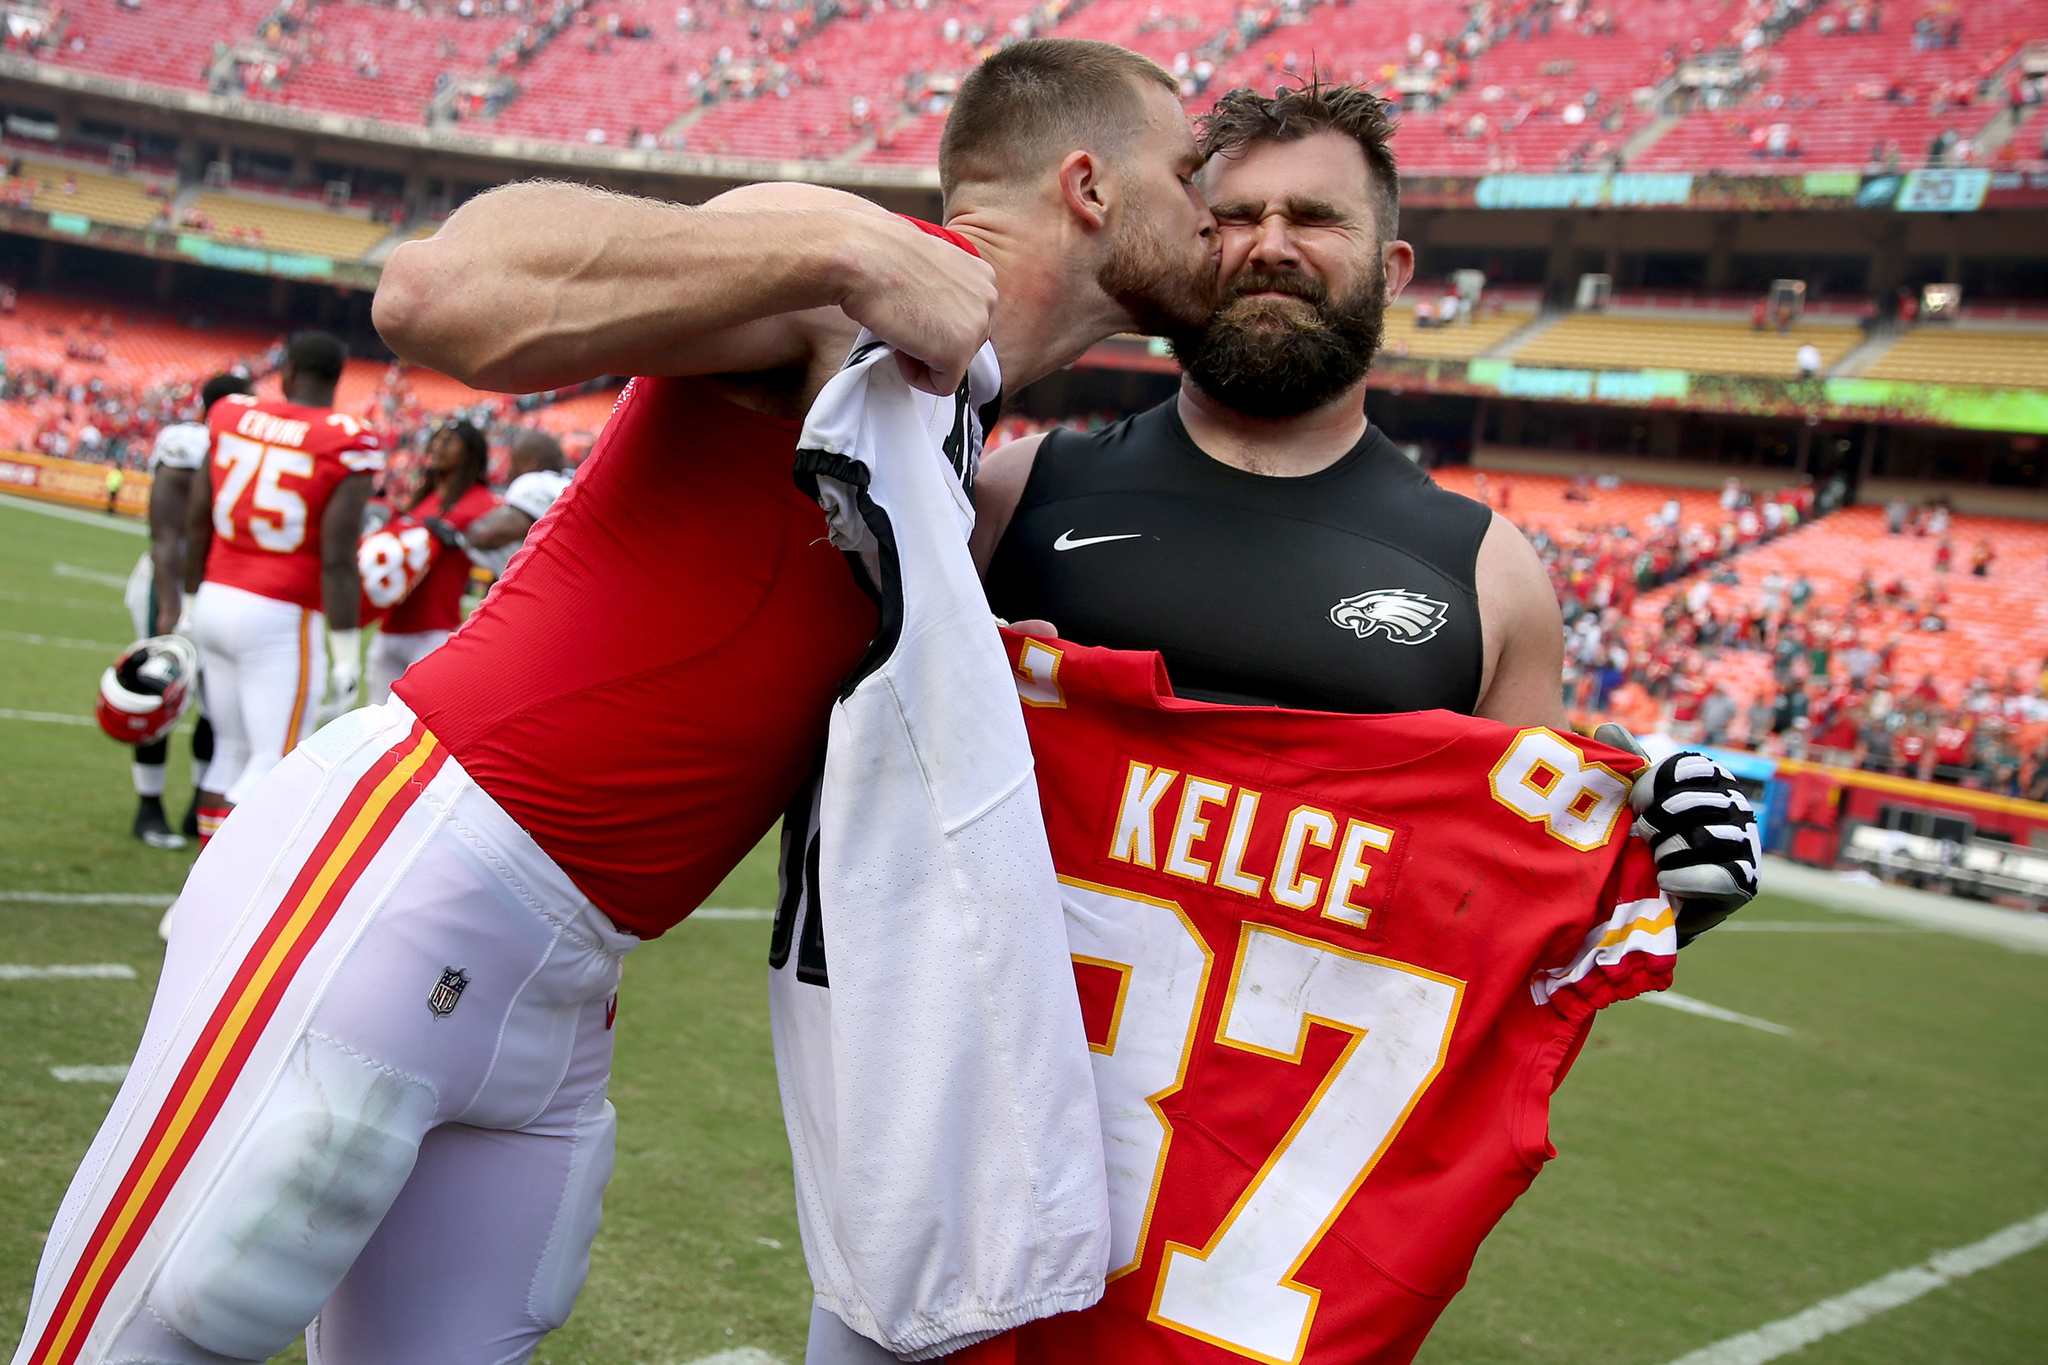 NFL jersey swaps: After the game ends, Eagles players say they can ...